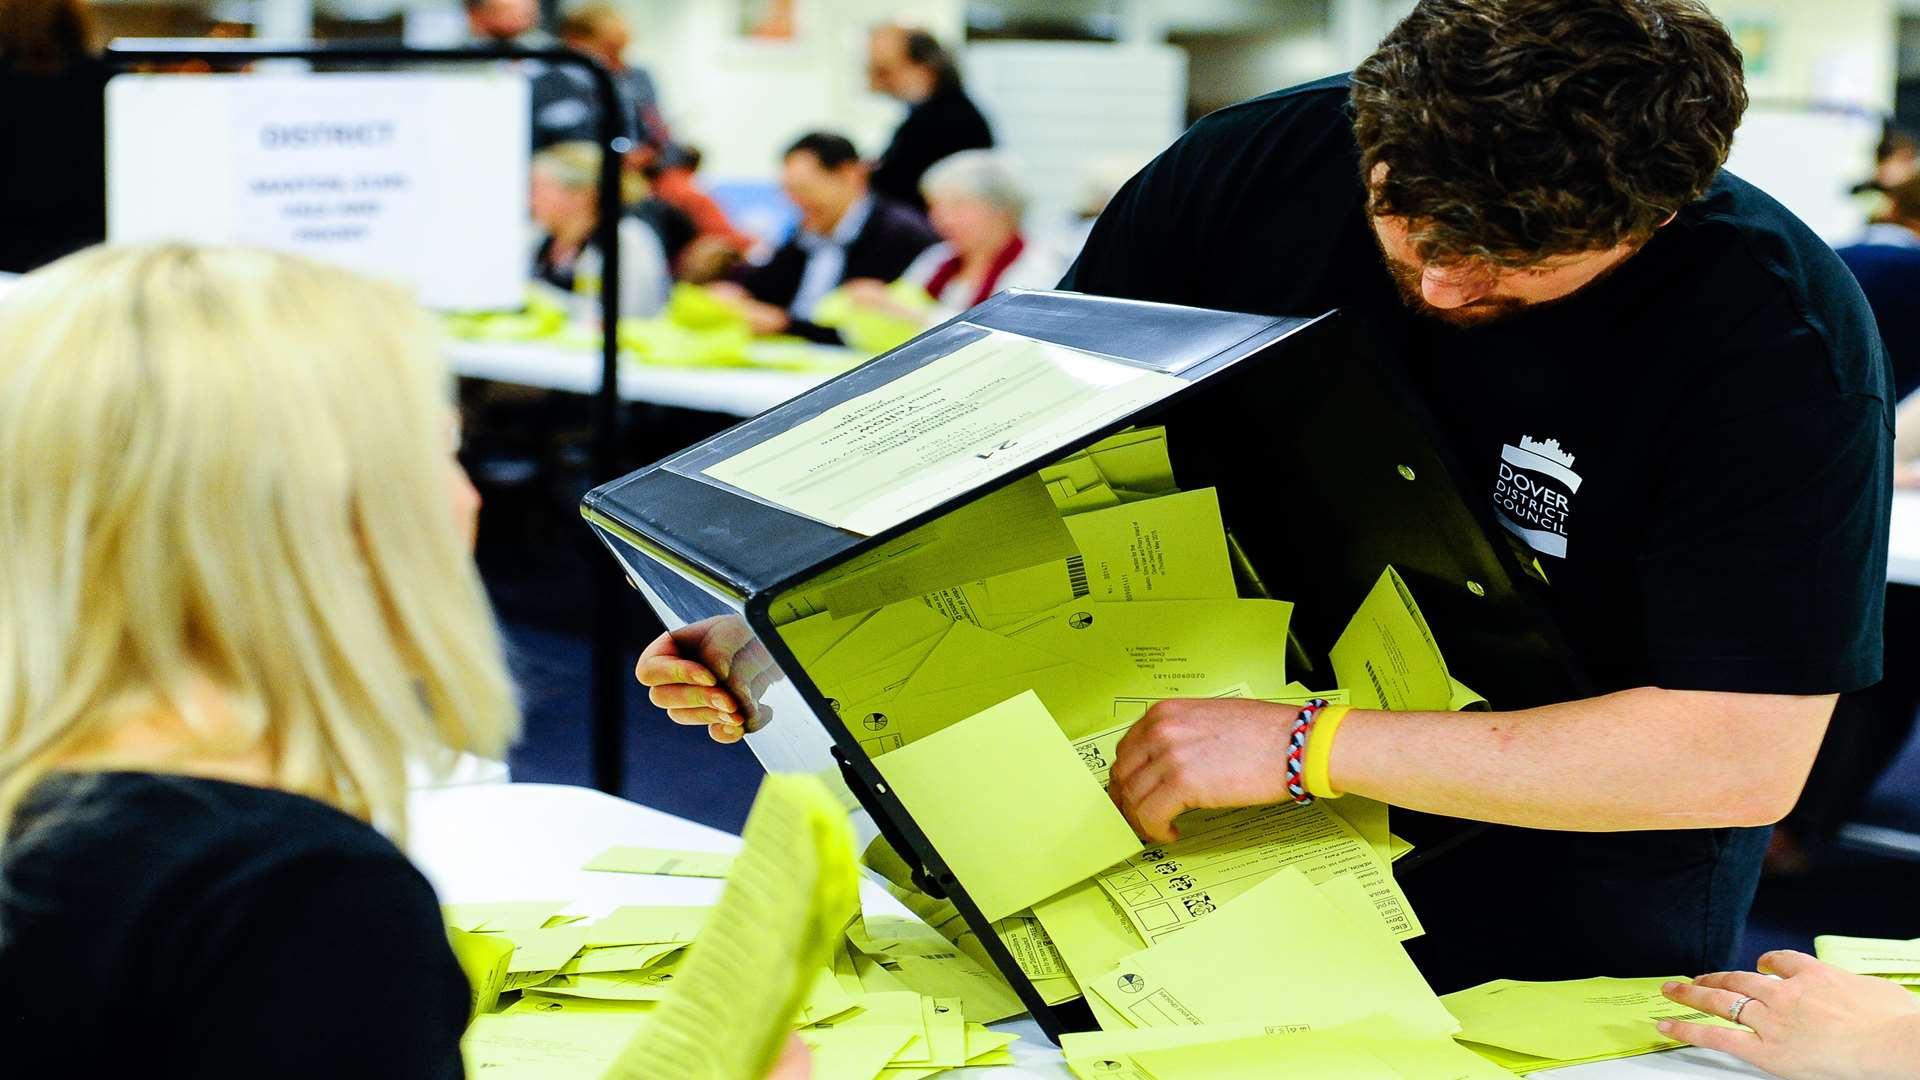 The first ballot box being emptied. Stock image